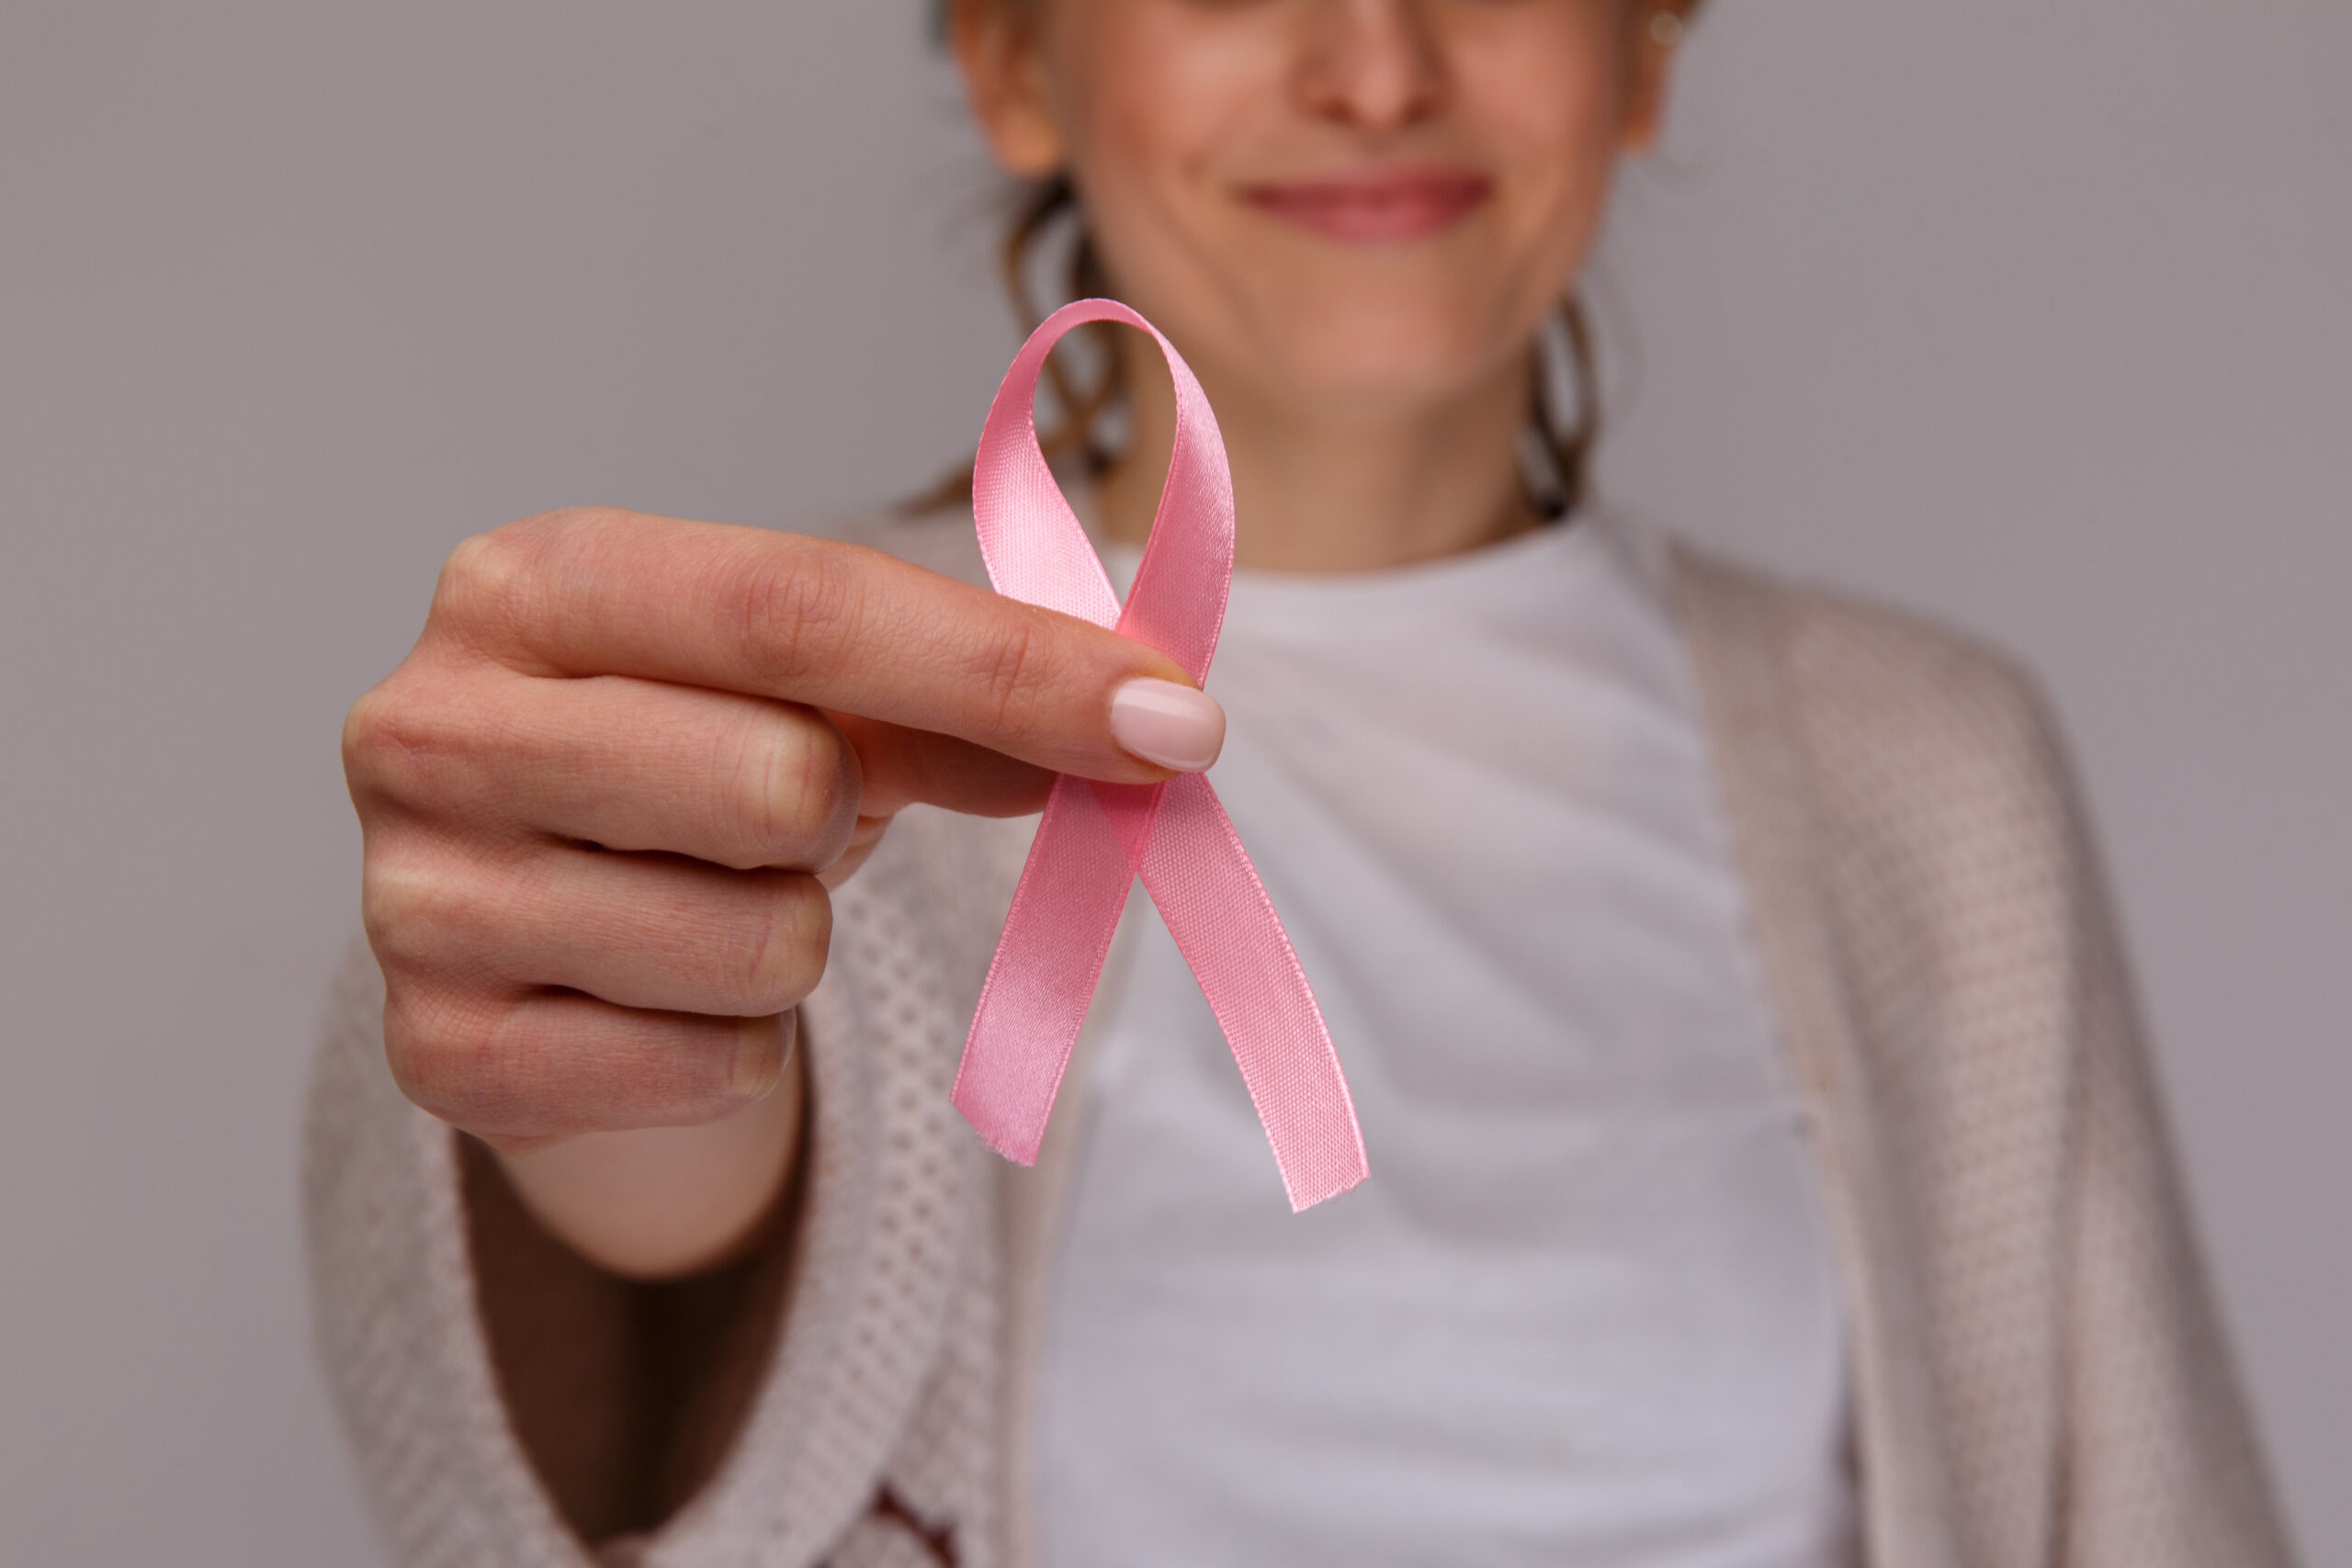 Breast Cancer Awareness Month: The key to fighting the disease